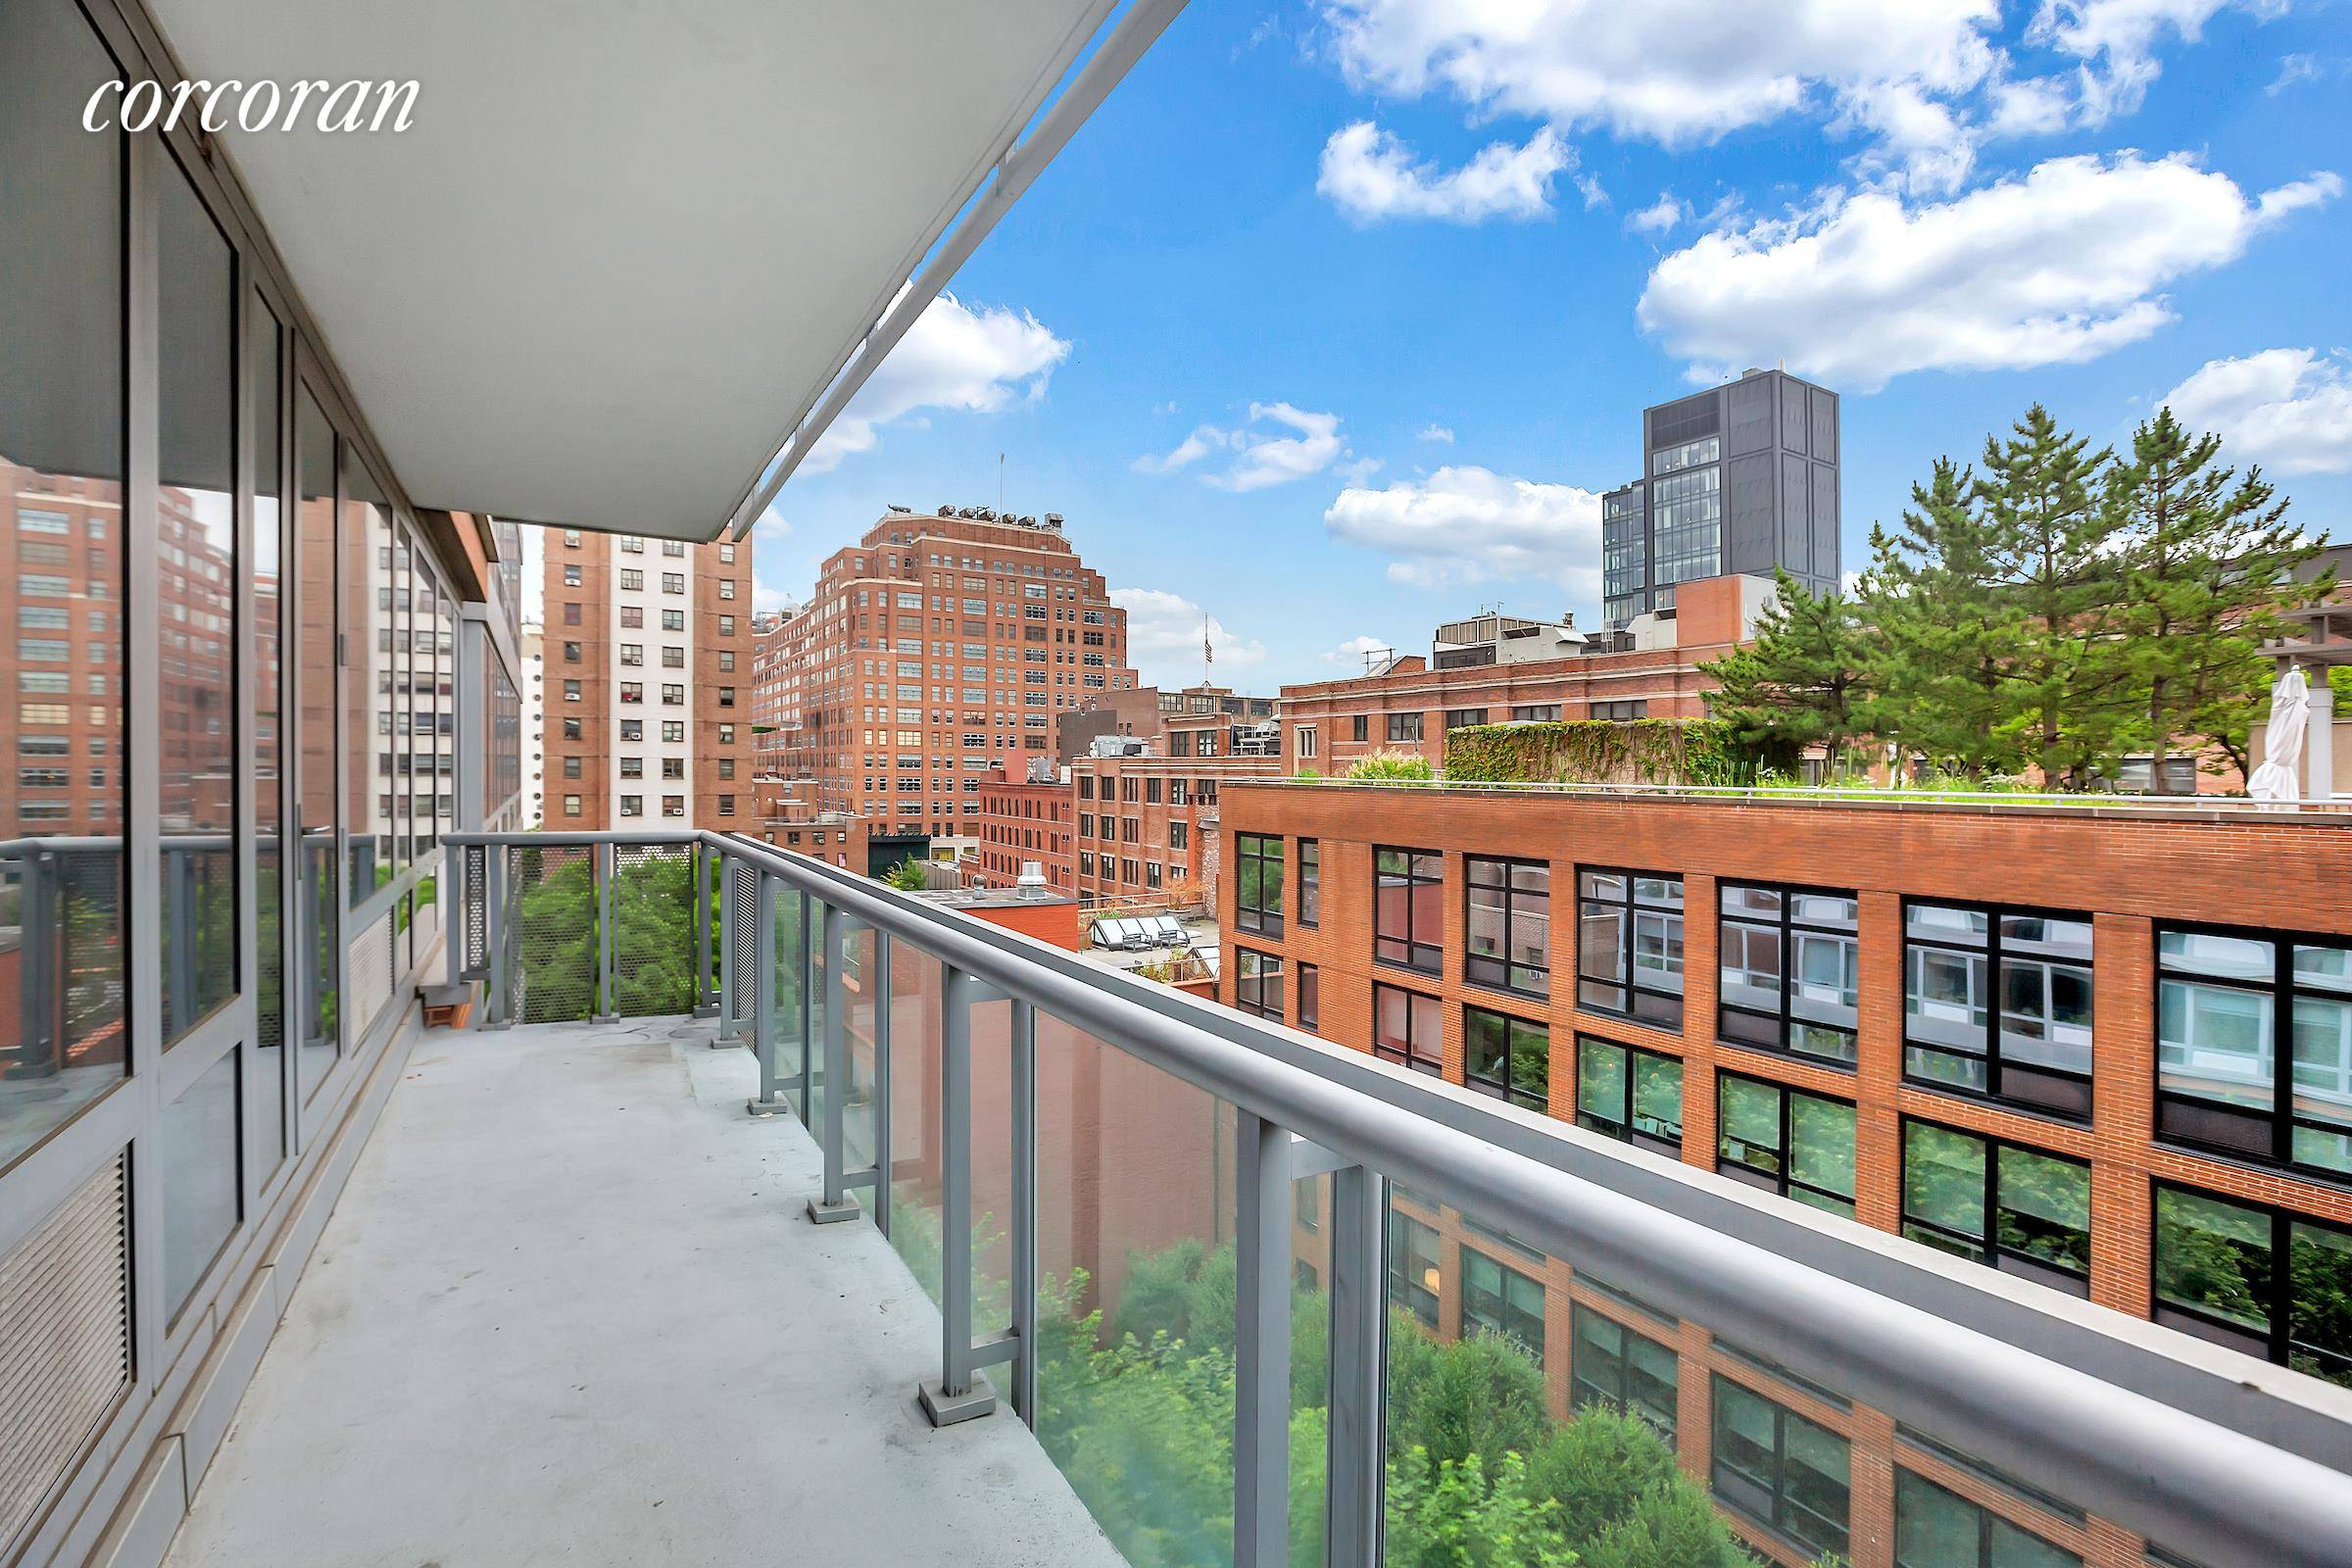 This beautiful 1, 350 SF apartment located at 450 West 17th Street, also known as The Caledonia.